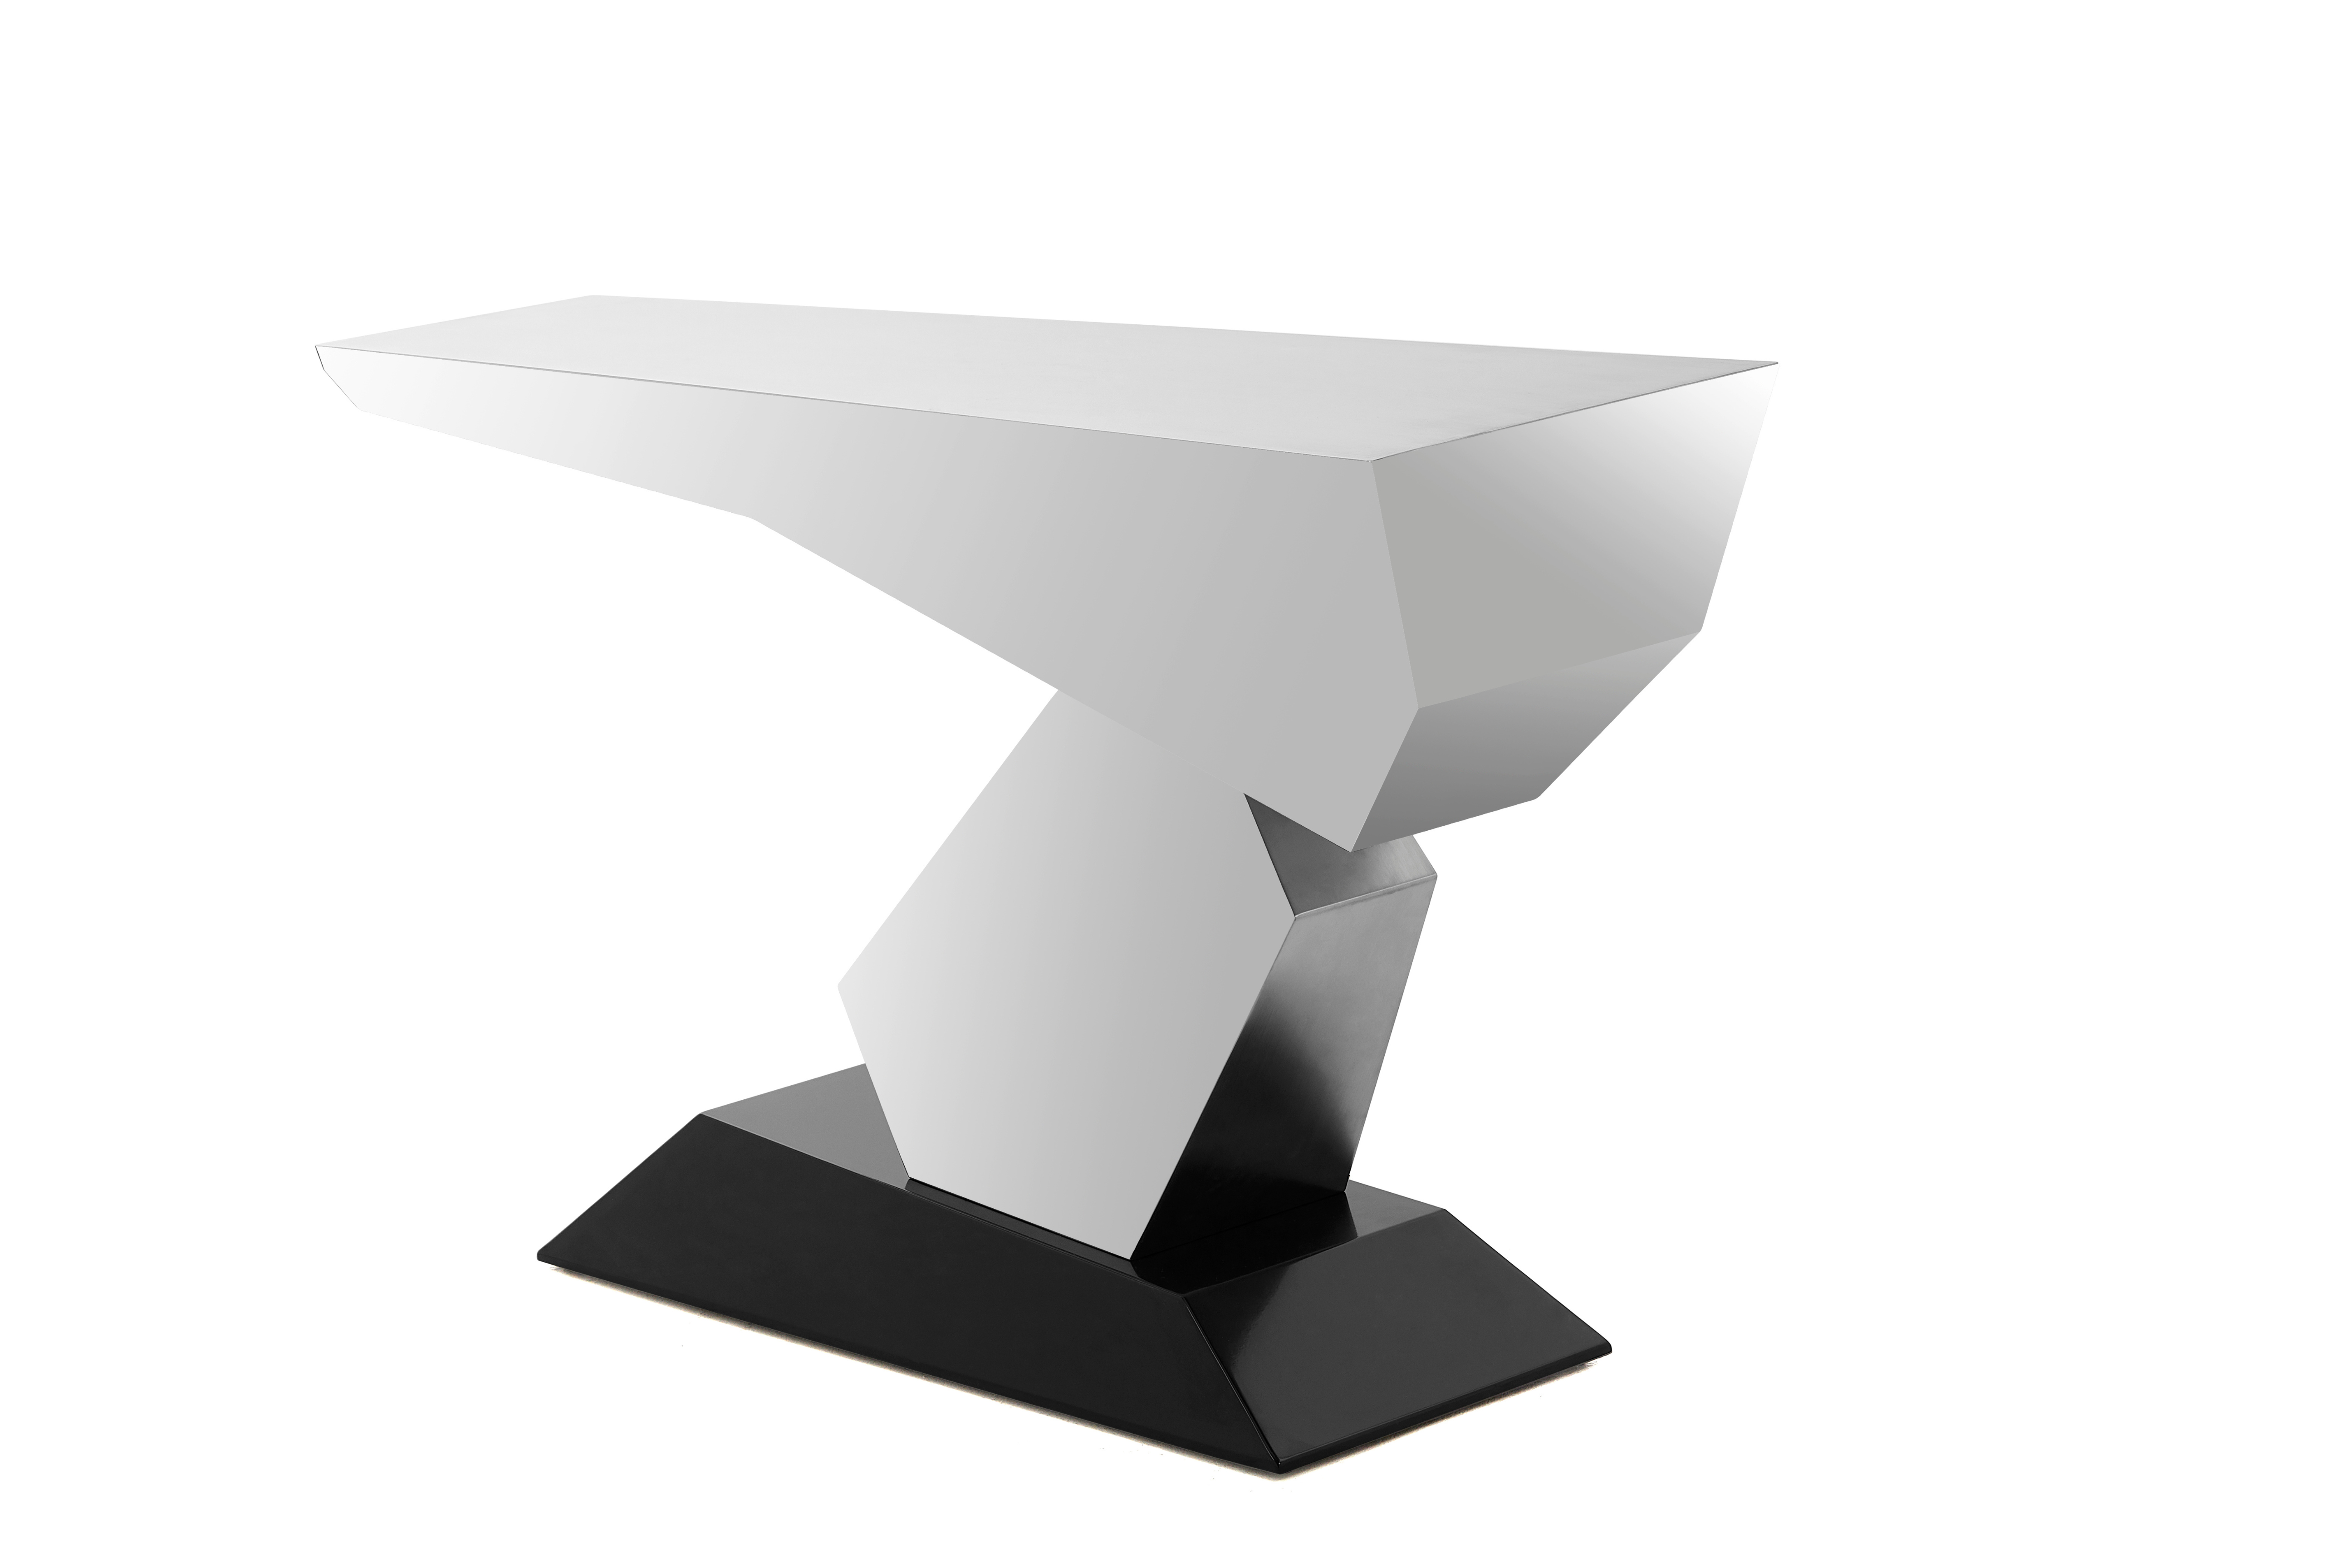 SHERES "Formation" Console table